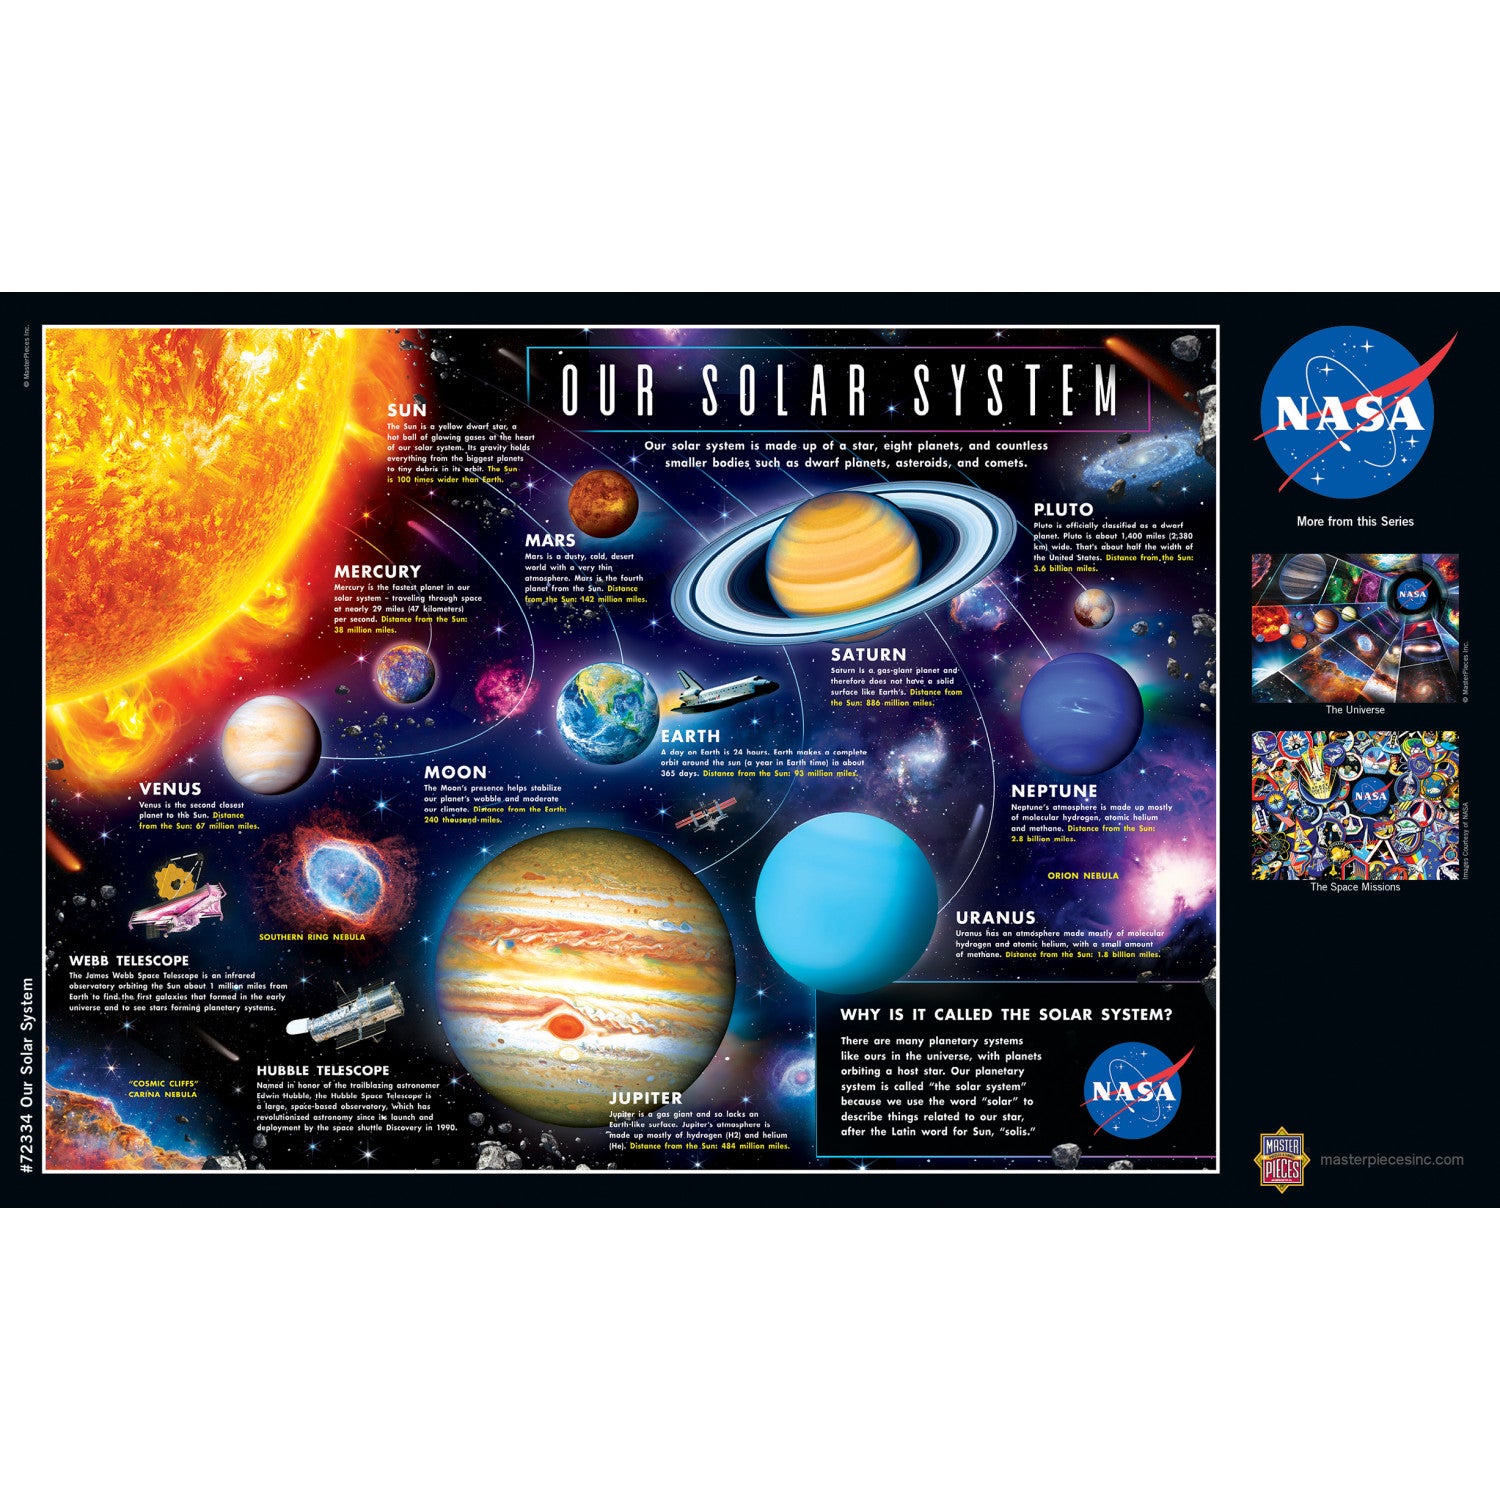 Our Solar System - 1000 Piece Jigsaw Puzzle